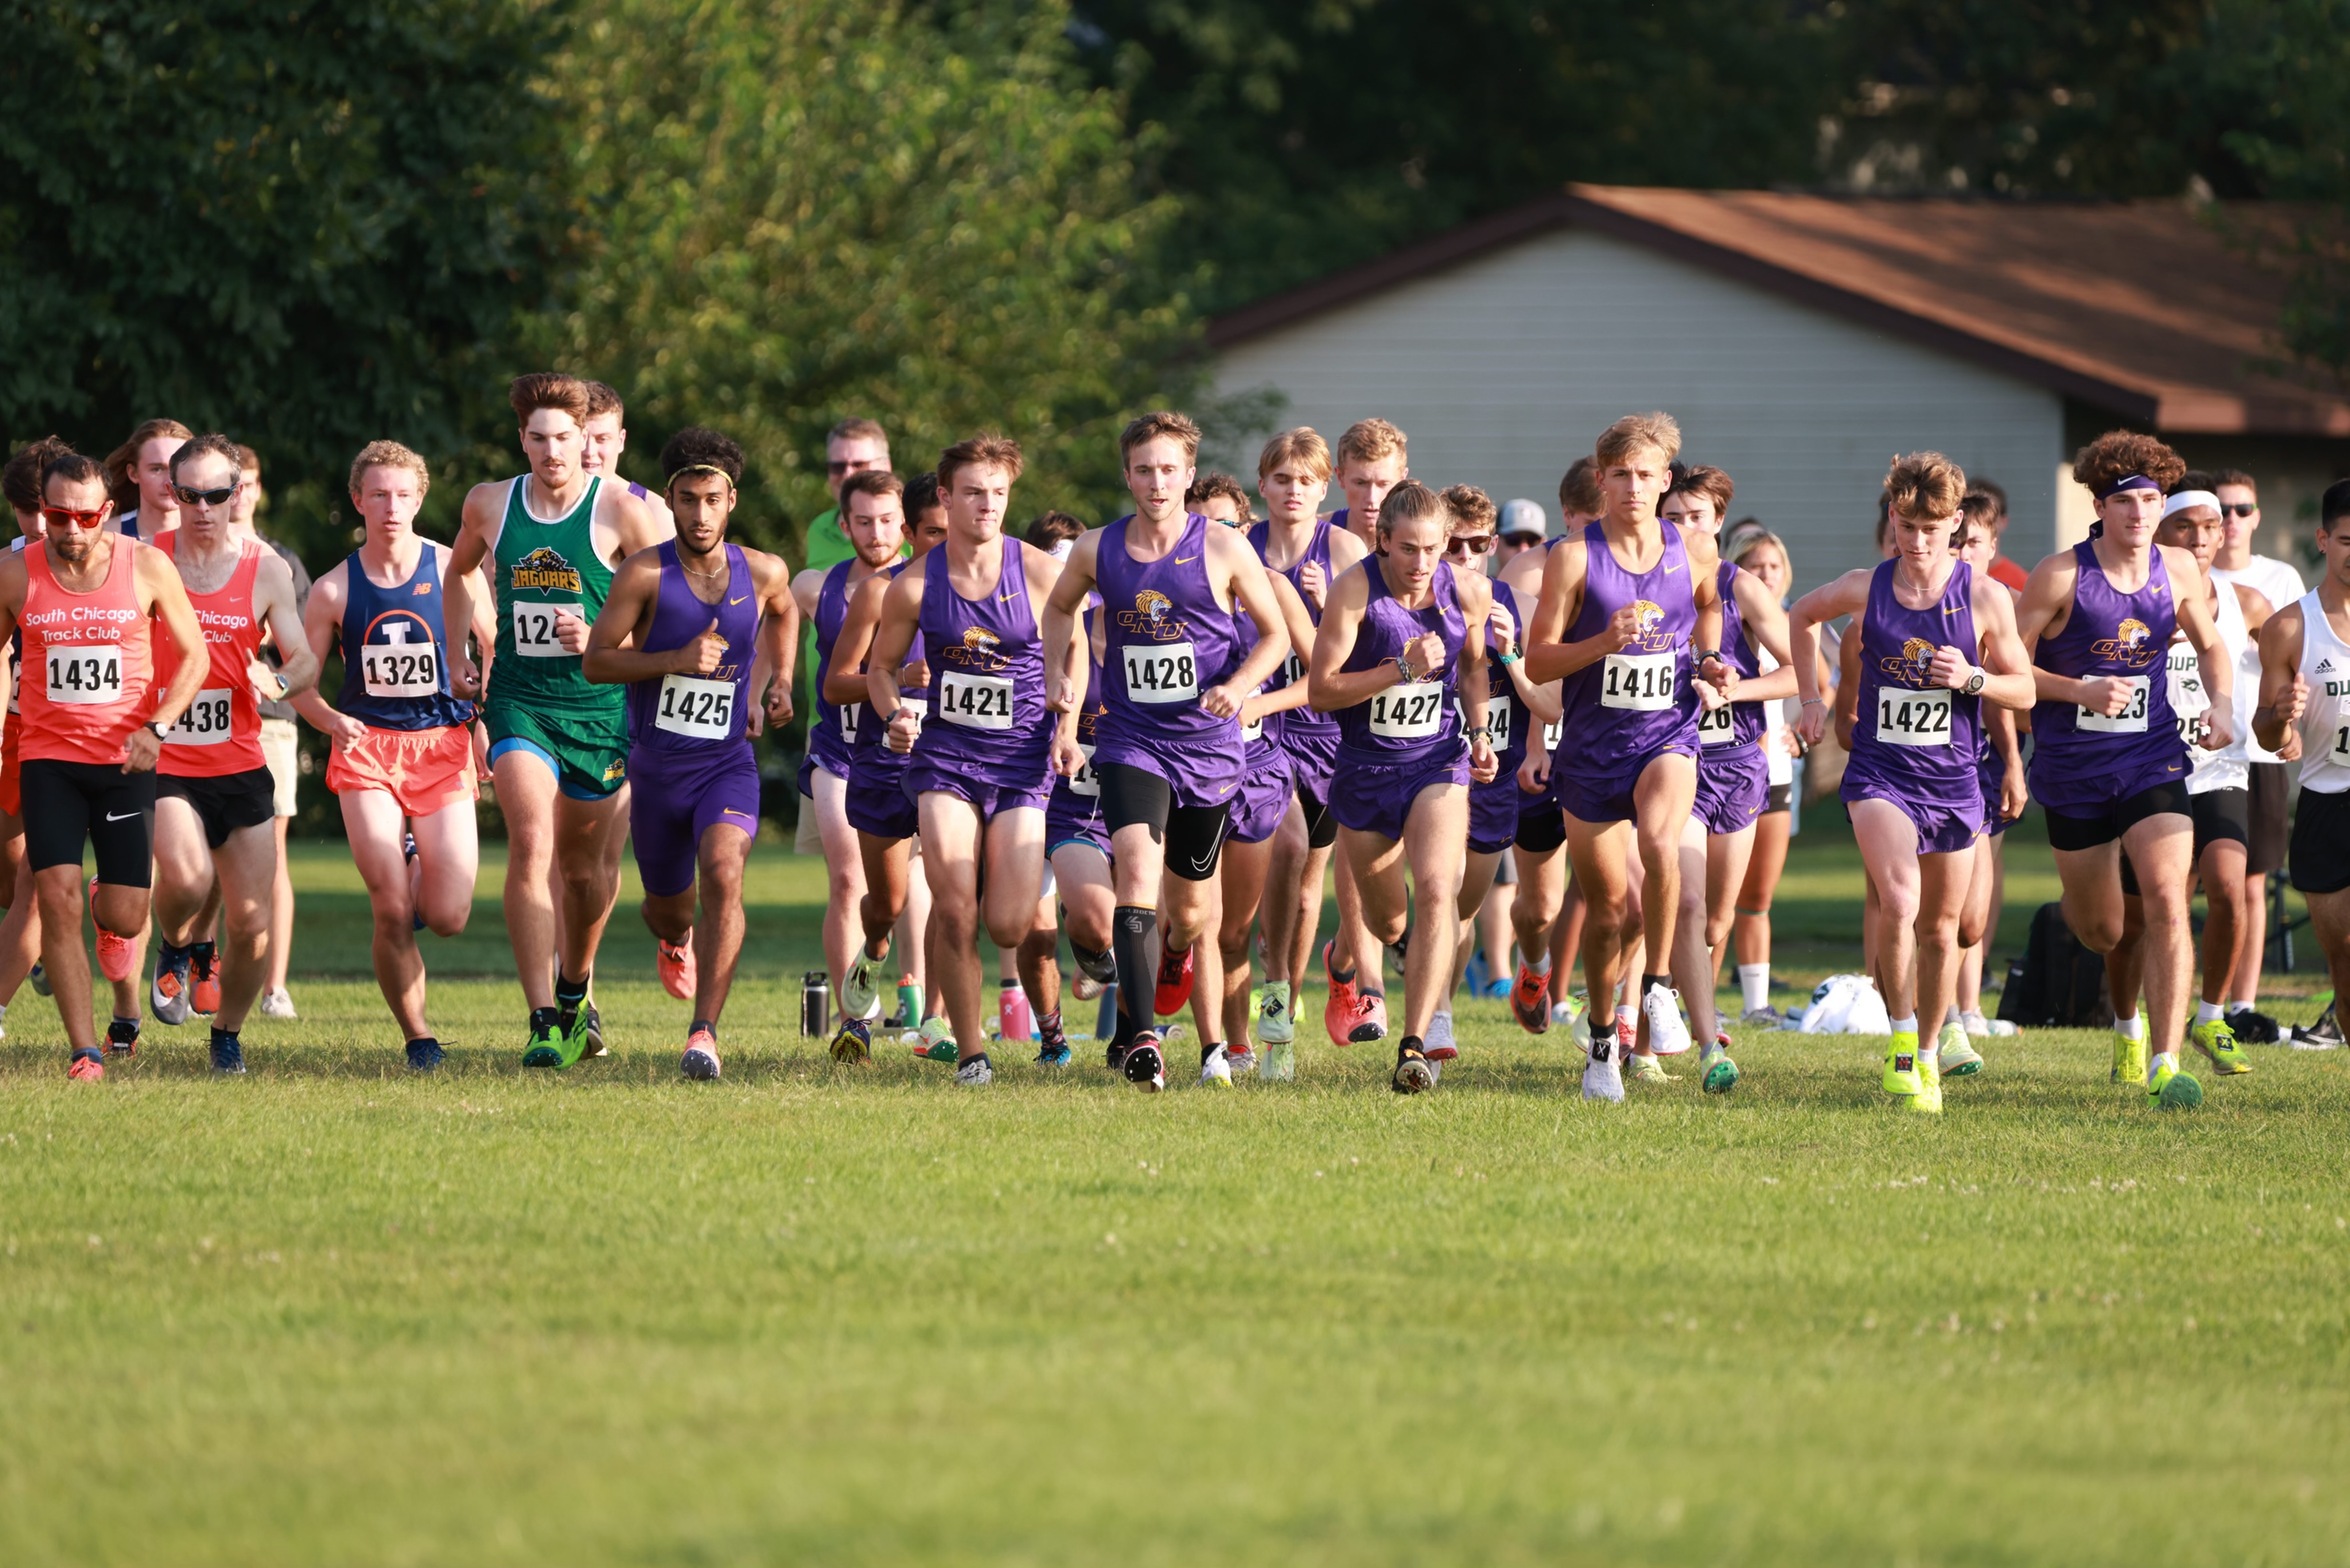 VALLANGEON WINS SECOND INDIVIDUAL TITLE; TIGERS RUNNERS-UP AT CCAC CHAMPIONSHIPS